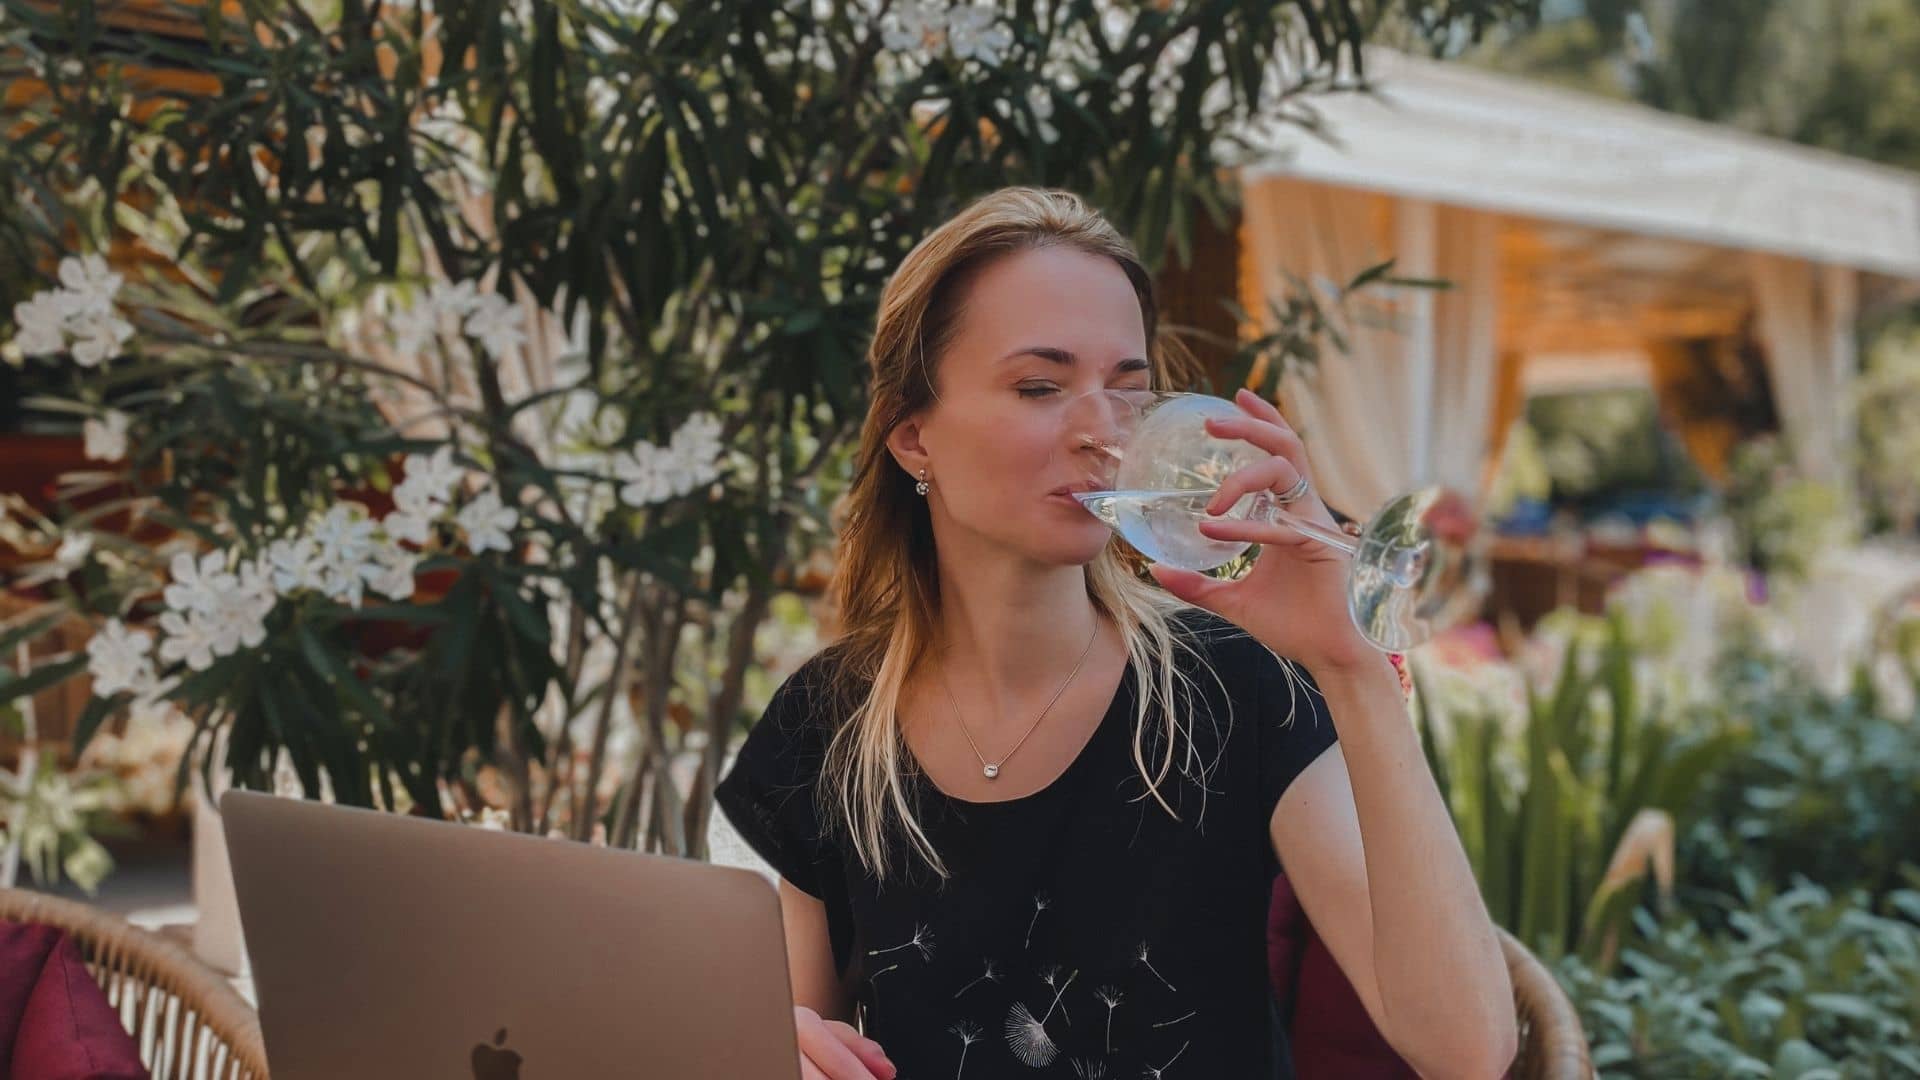 Tetyana is drinking water from a wine glass with her eyes closed. She is sitting at a table with a laptop. There are green trees on the background. 